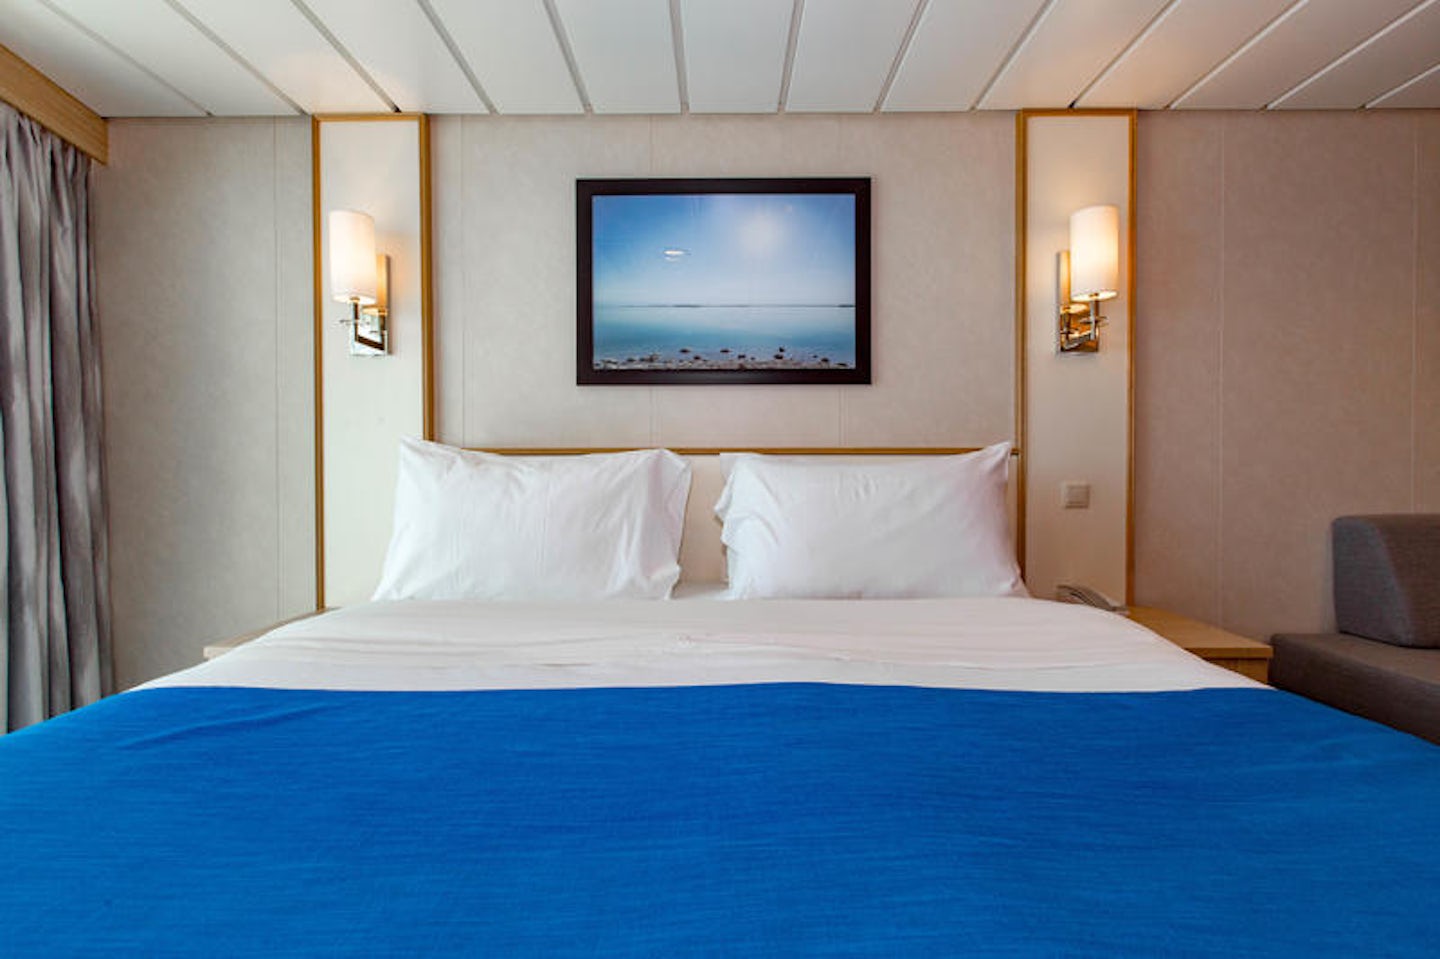 The Panoramic Ocean-View Cabin on Mariner of the Seas